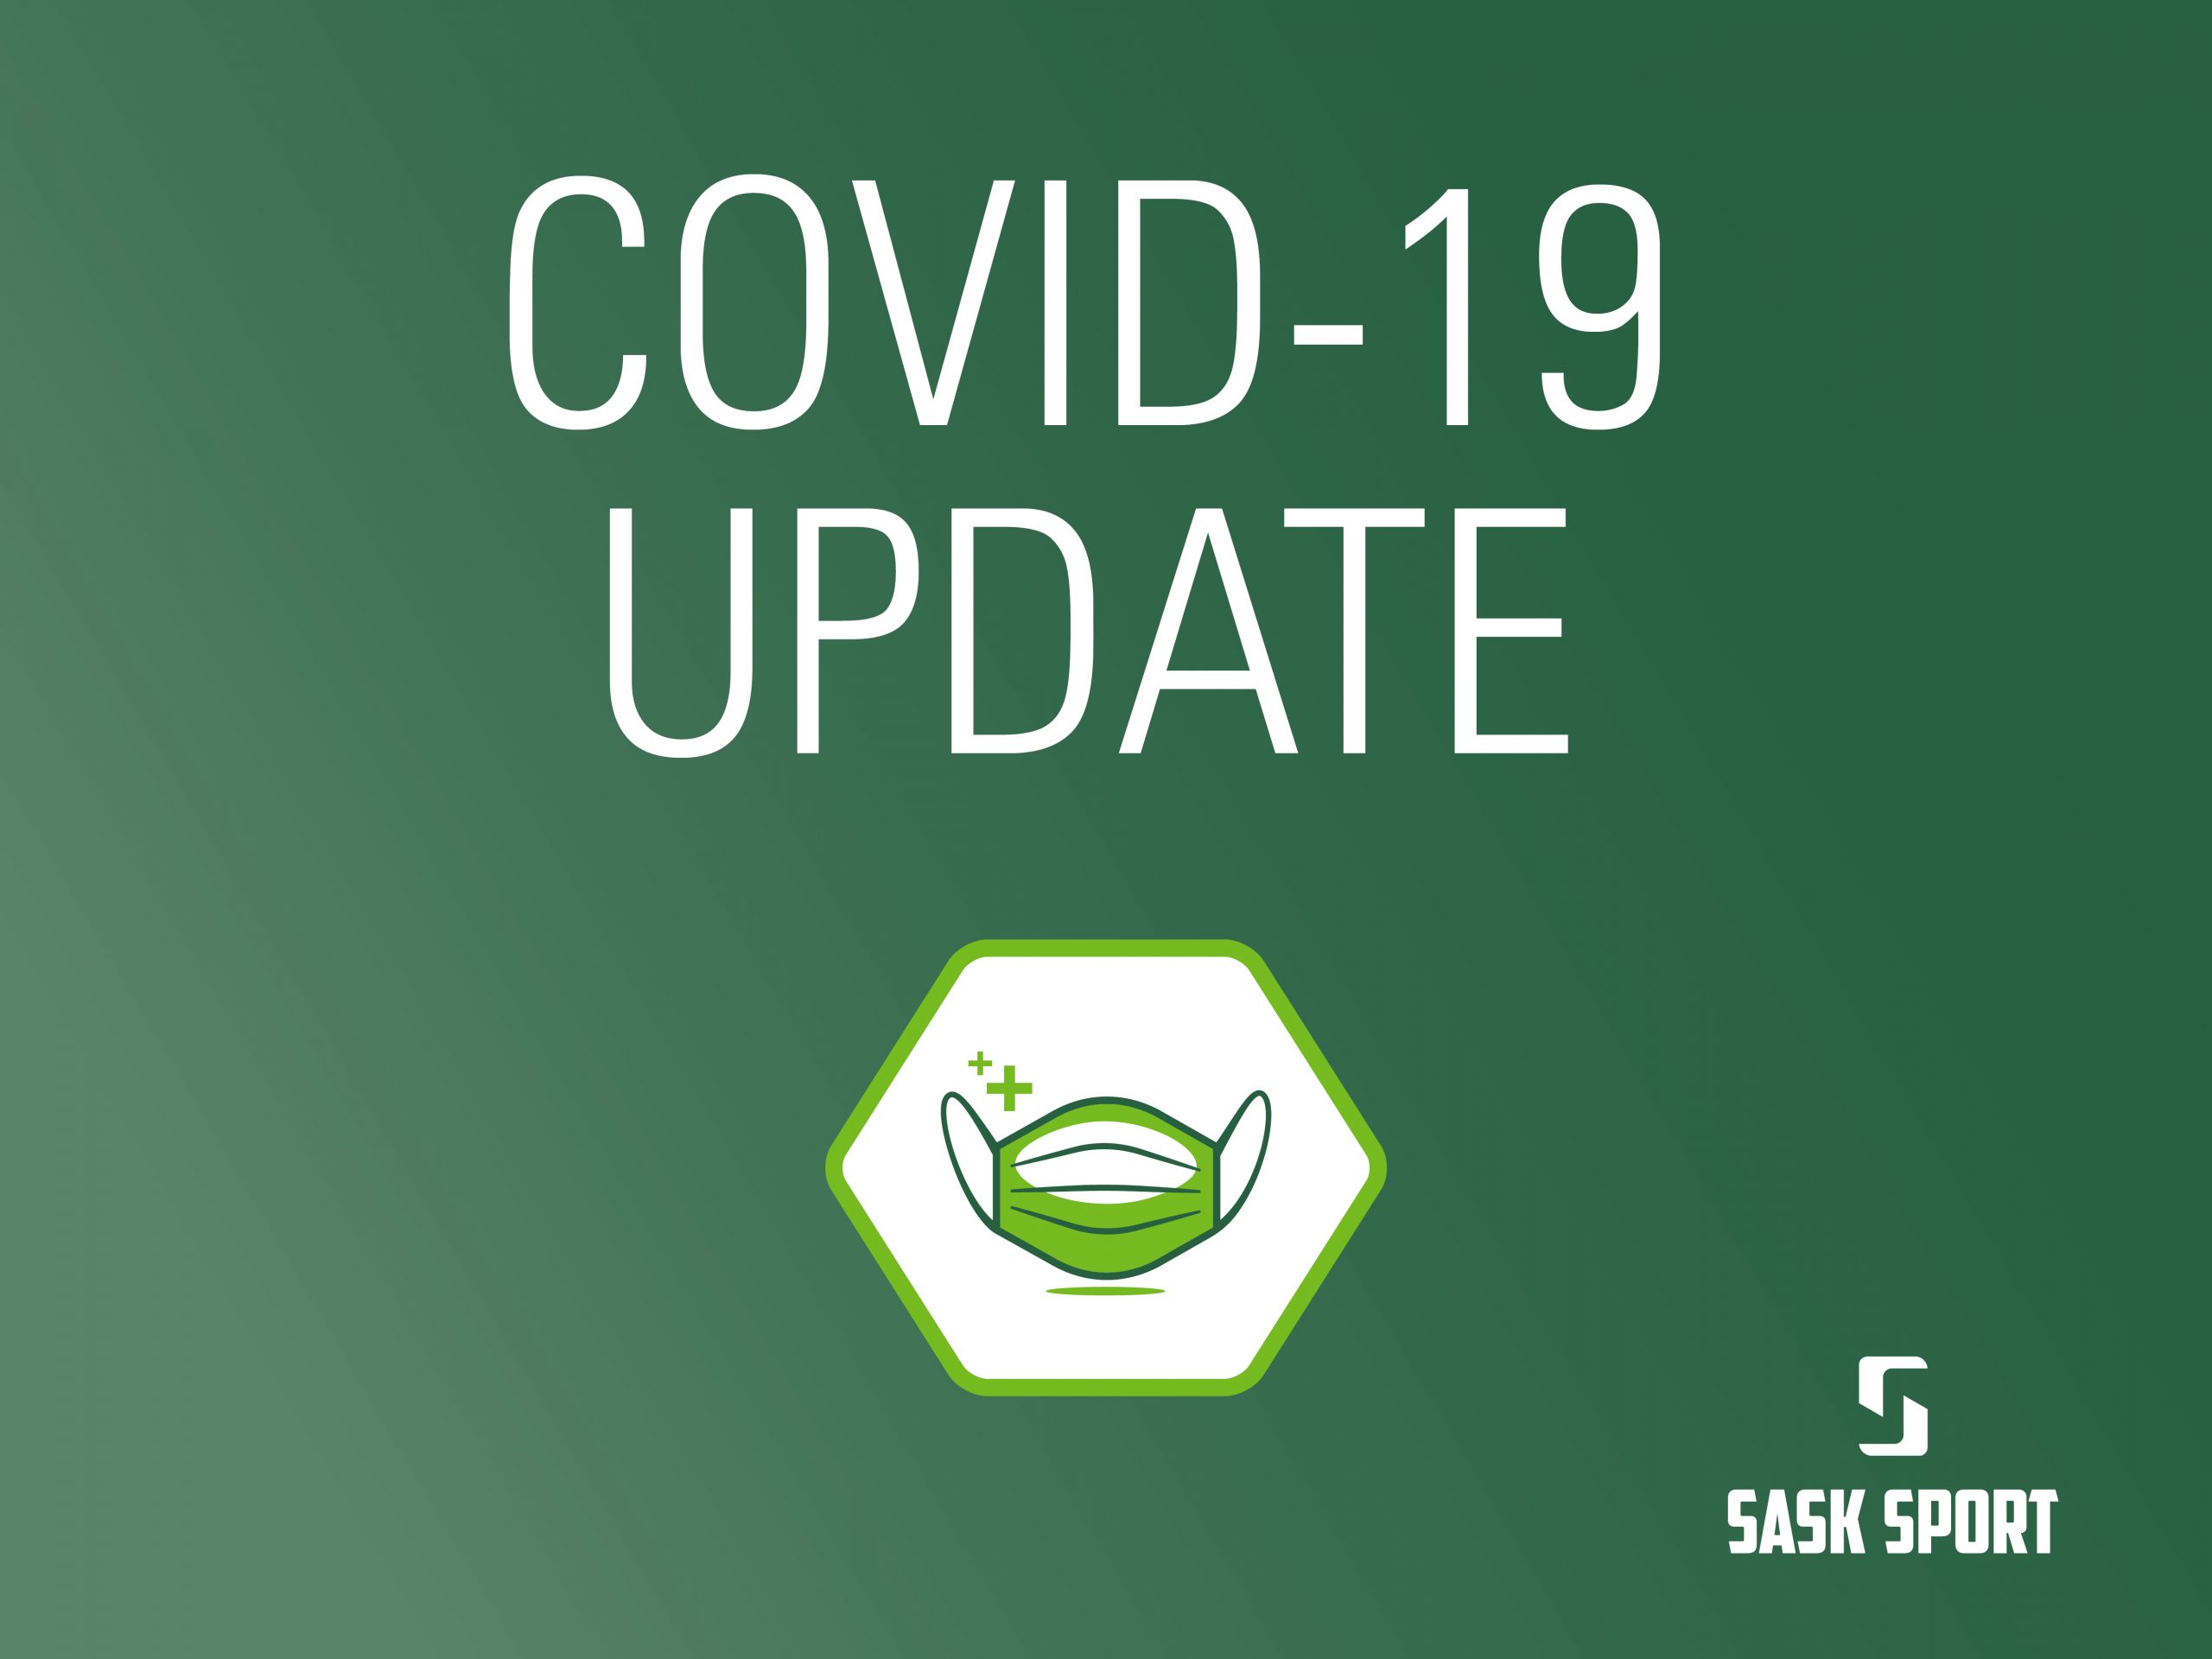 Updates to COVID-19 testing and case management guidelines